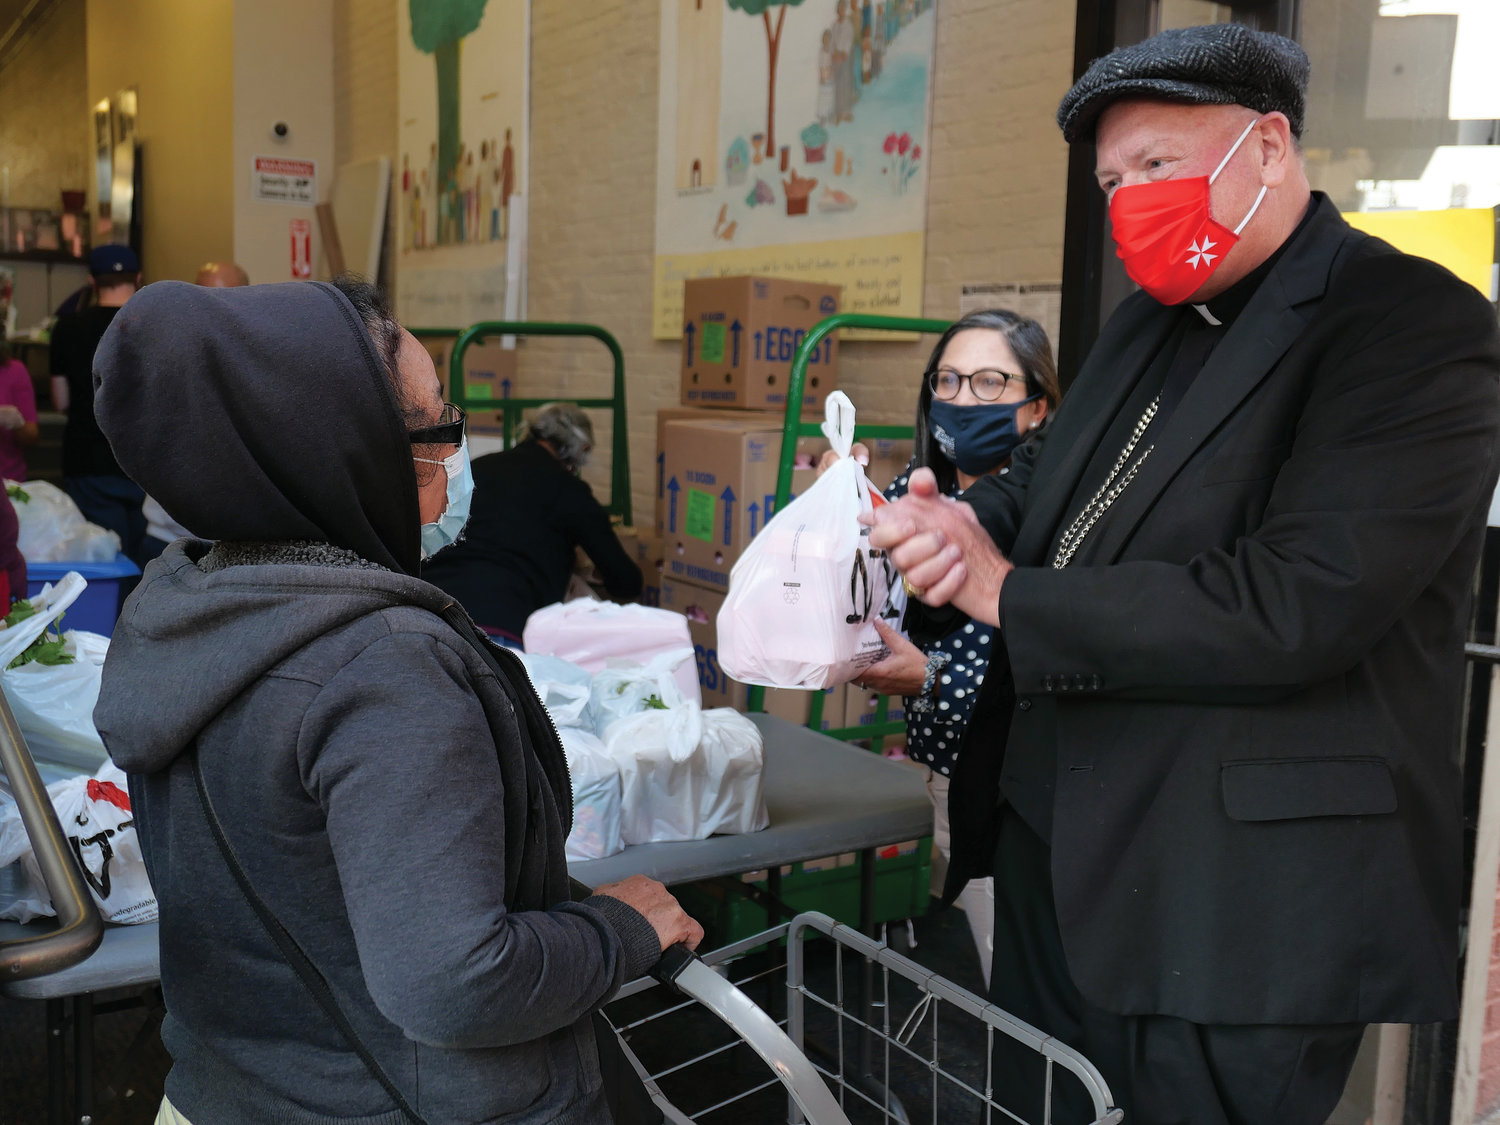 Cardinal Dolan helps to hand out bags of food during a Sept. 23 Catholic Charities food distribution event at its site on East 152nd Street in the Bronx.